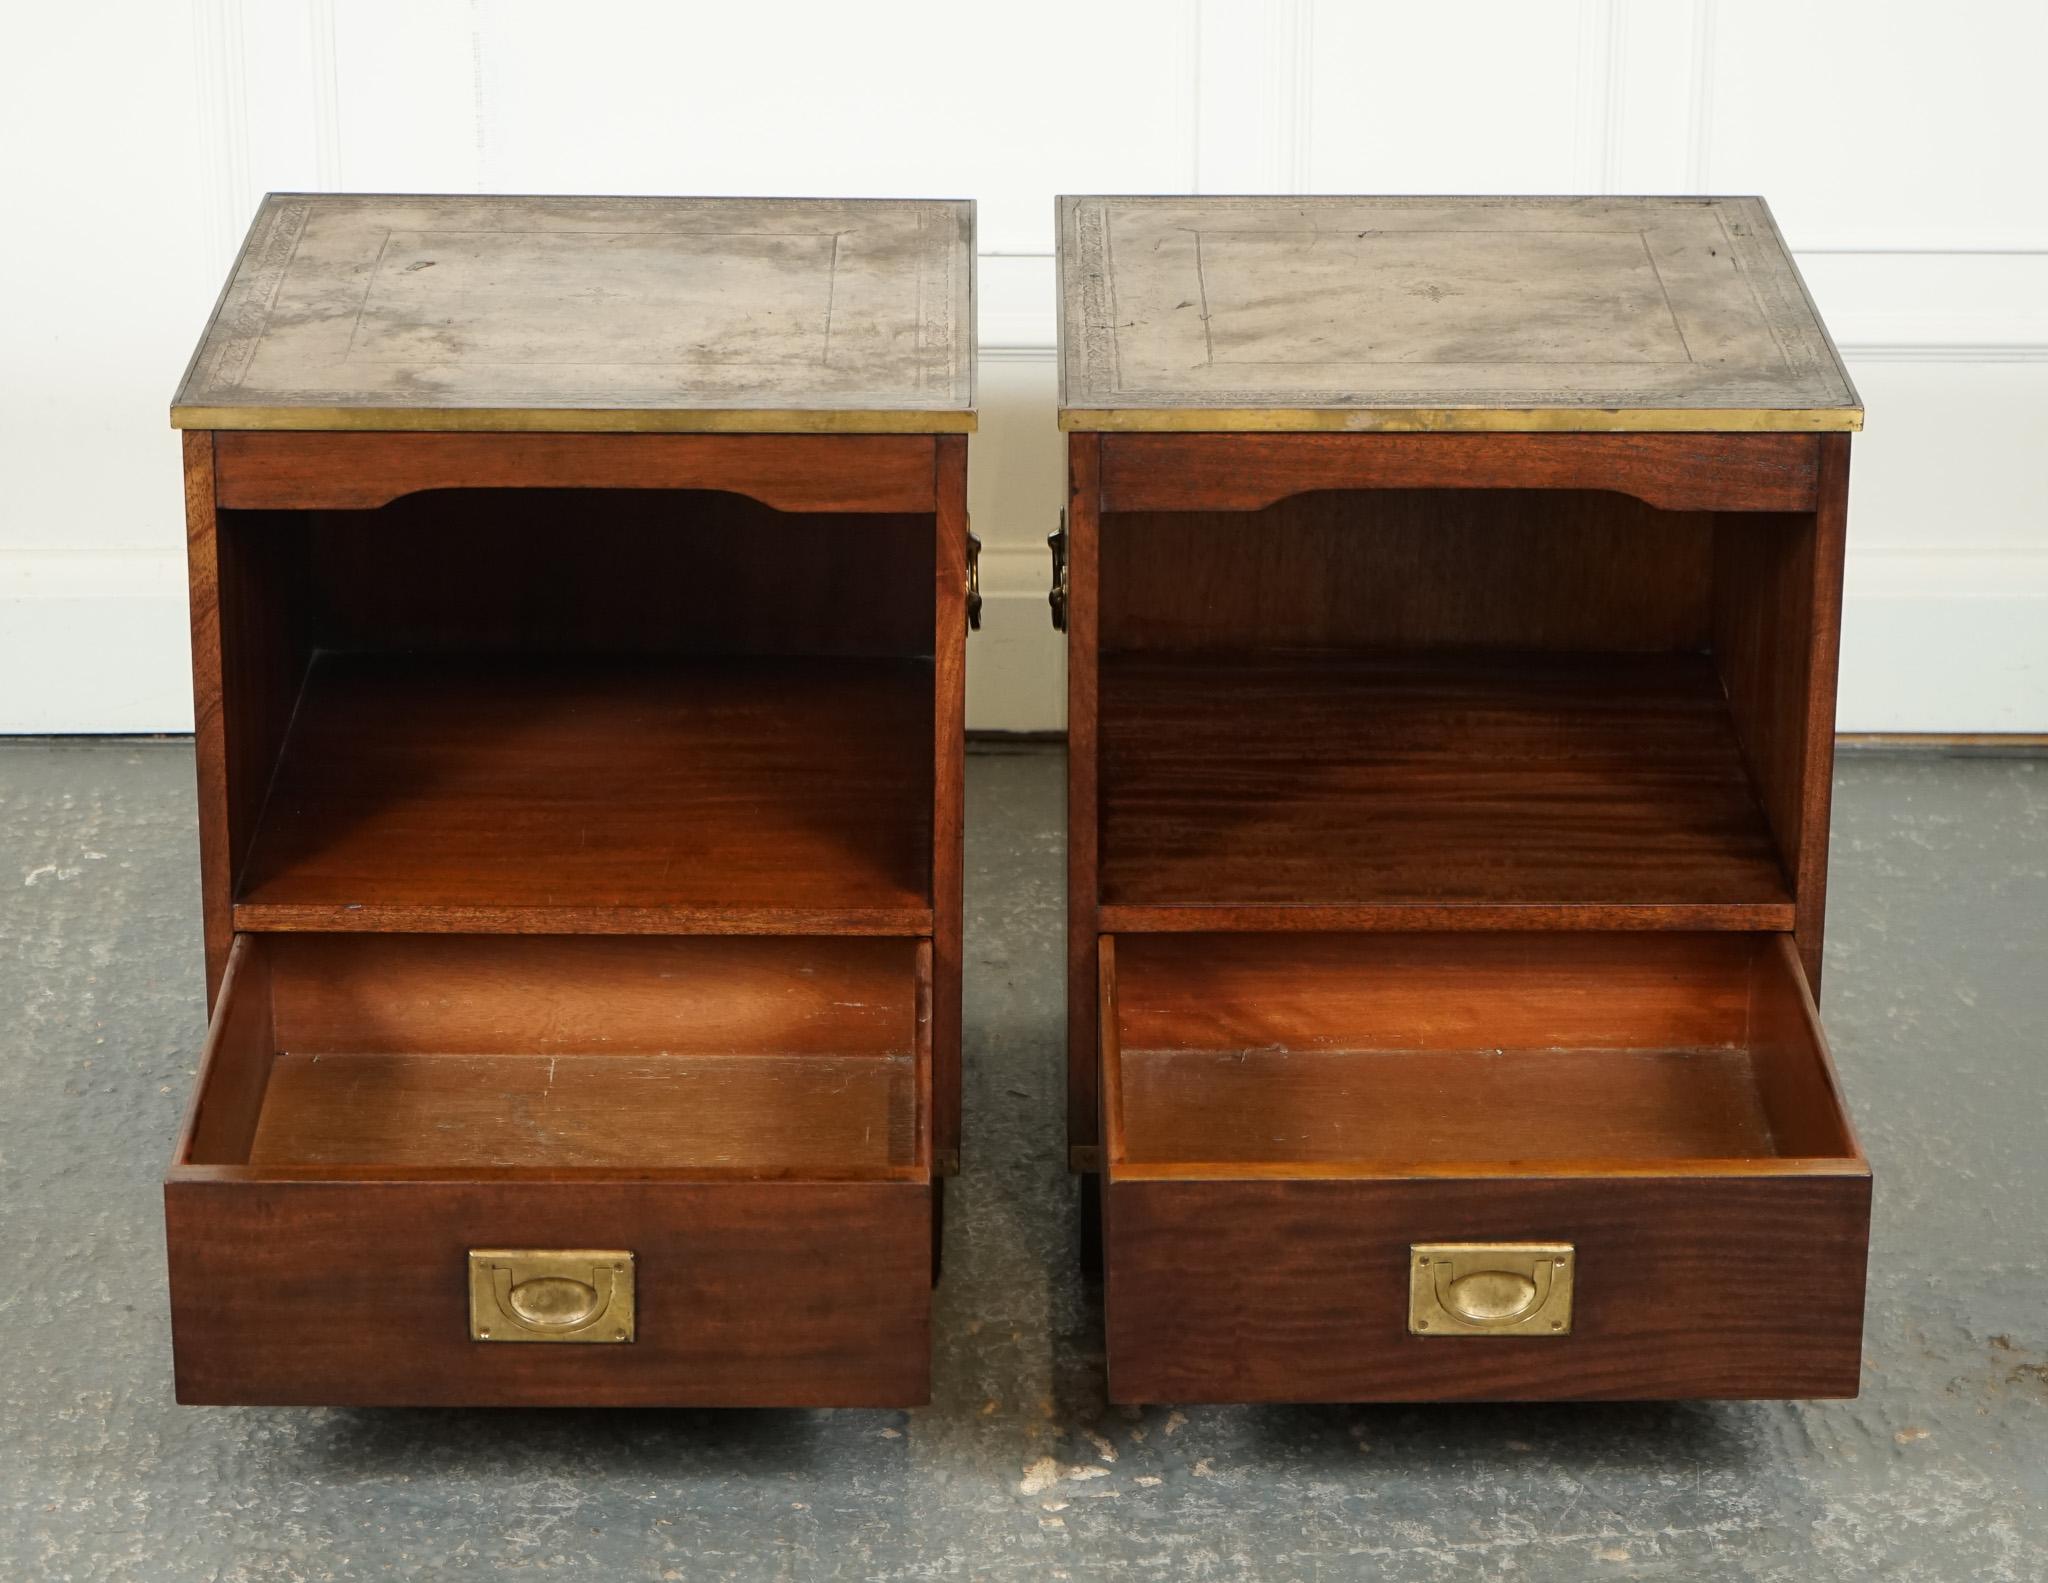 British VINTAGE PAIR OF MILITARY CAMPAIGN BEDSIDE TABLES NiGHTSTANDS BROWN LEATHER TOPJ1 For Sale